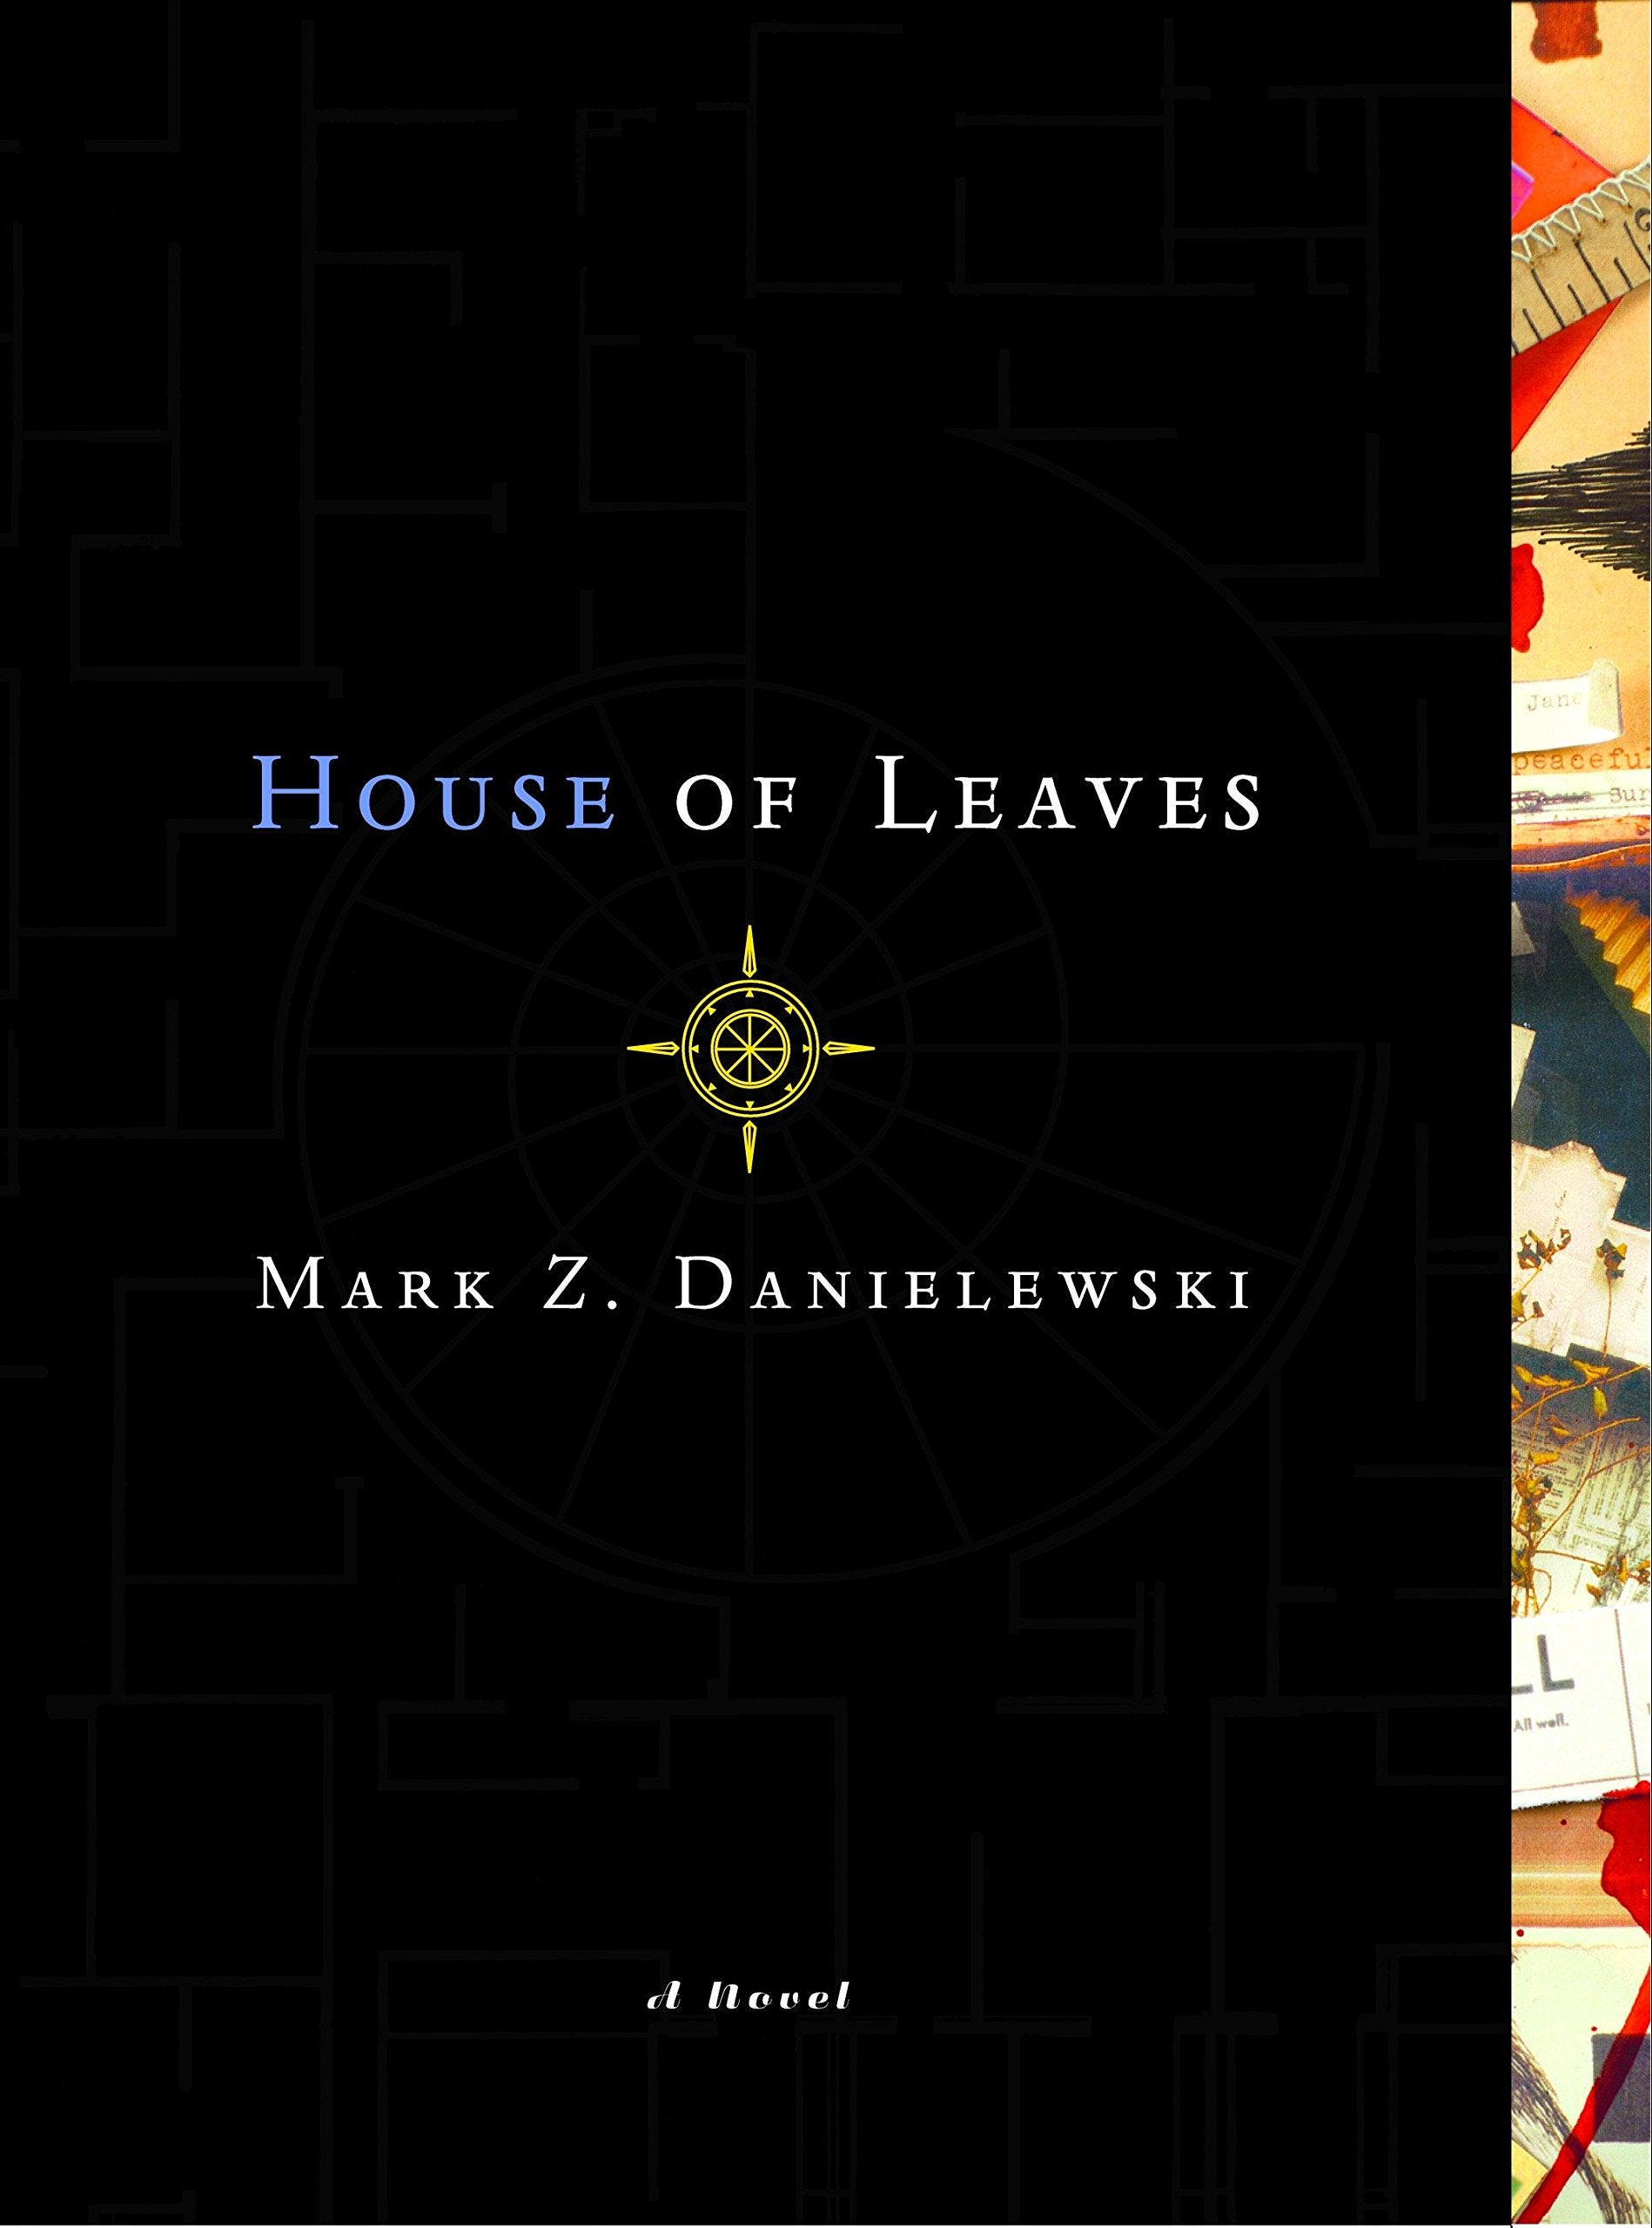 Cover of House of Leaves (Image: Random House)